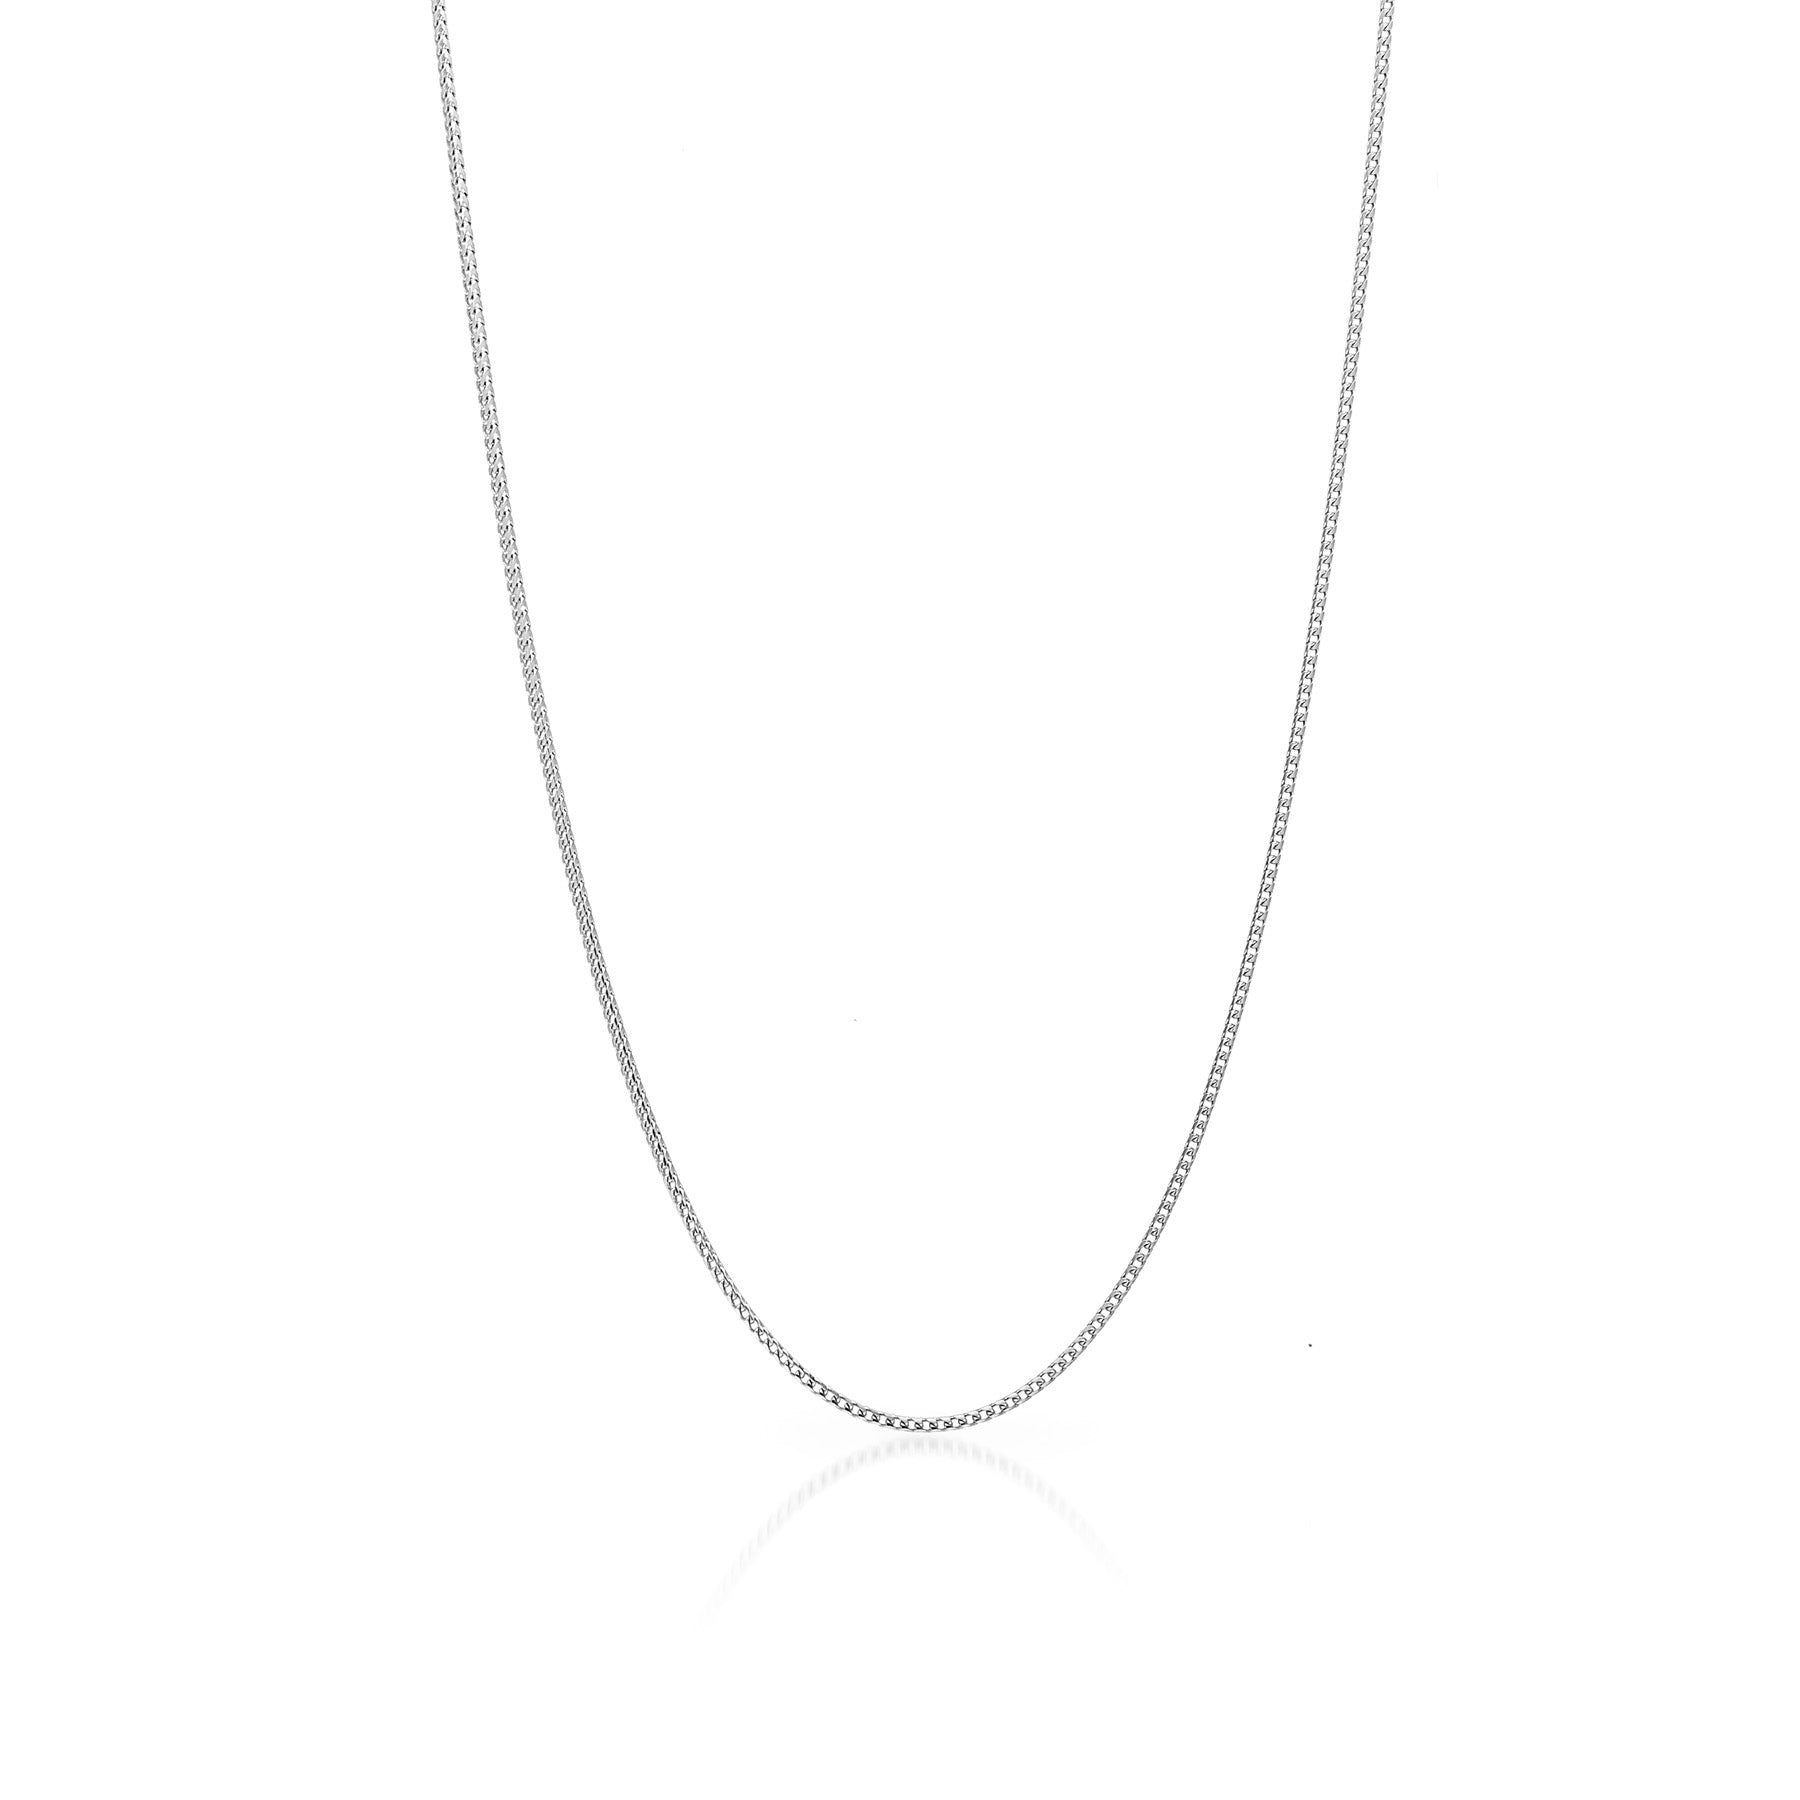 14KT White Gold 1mm Box Chain Necklace